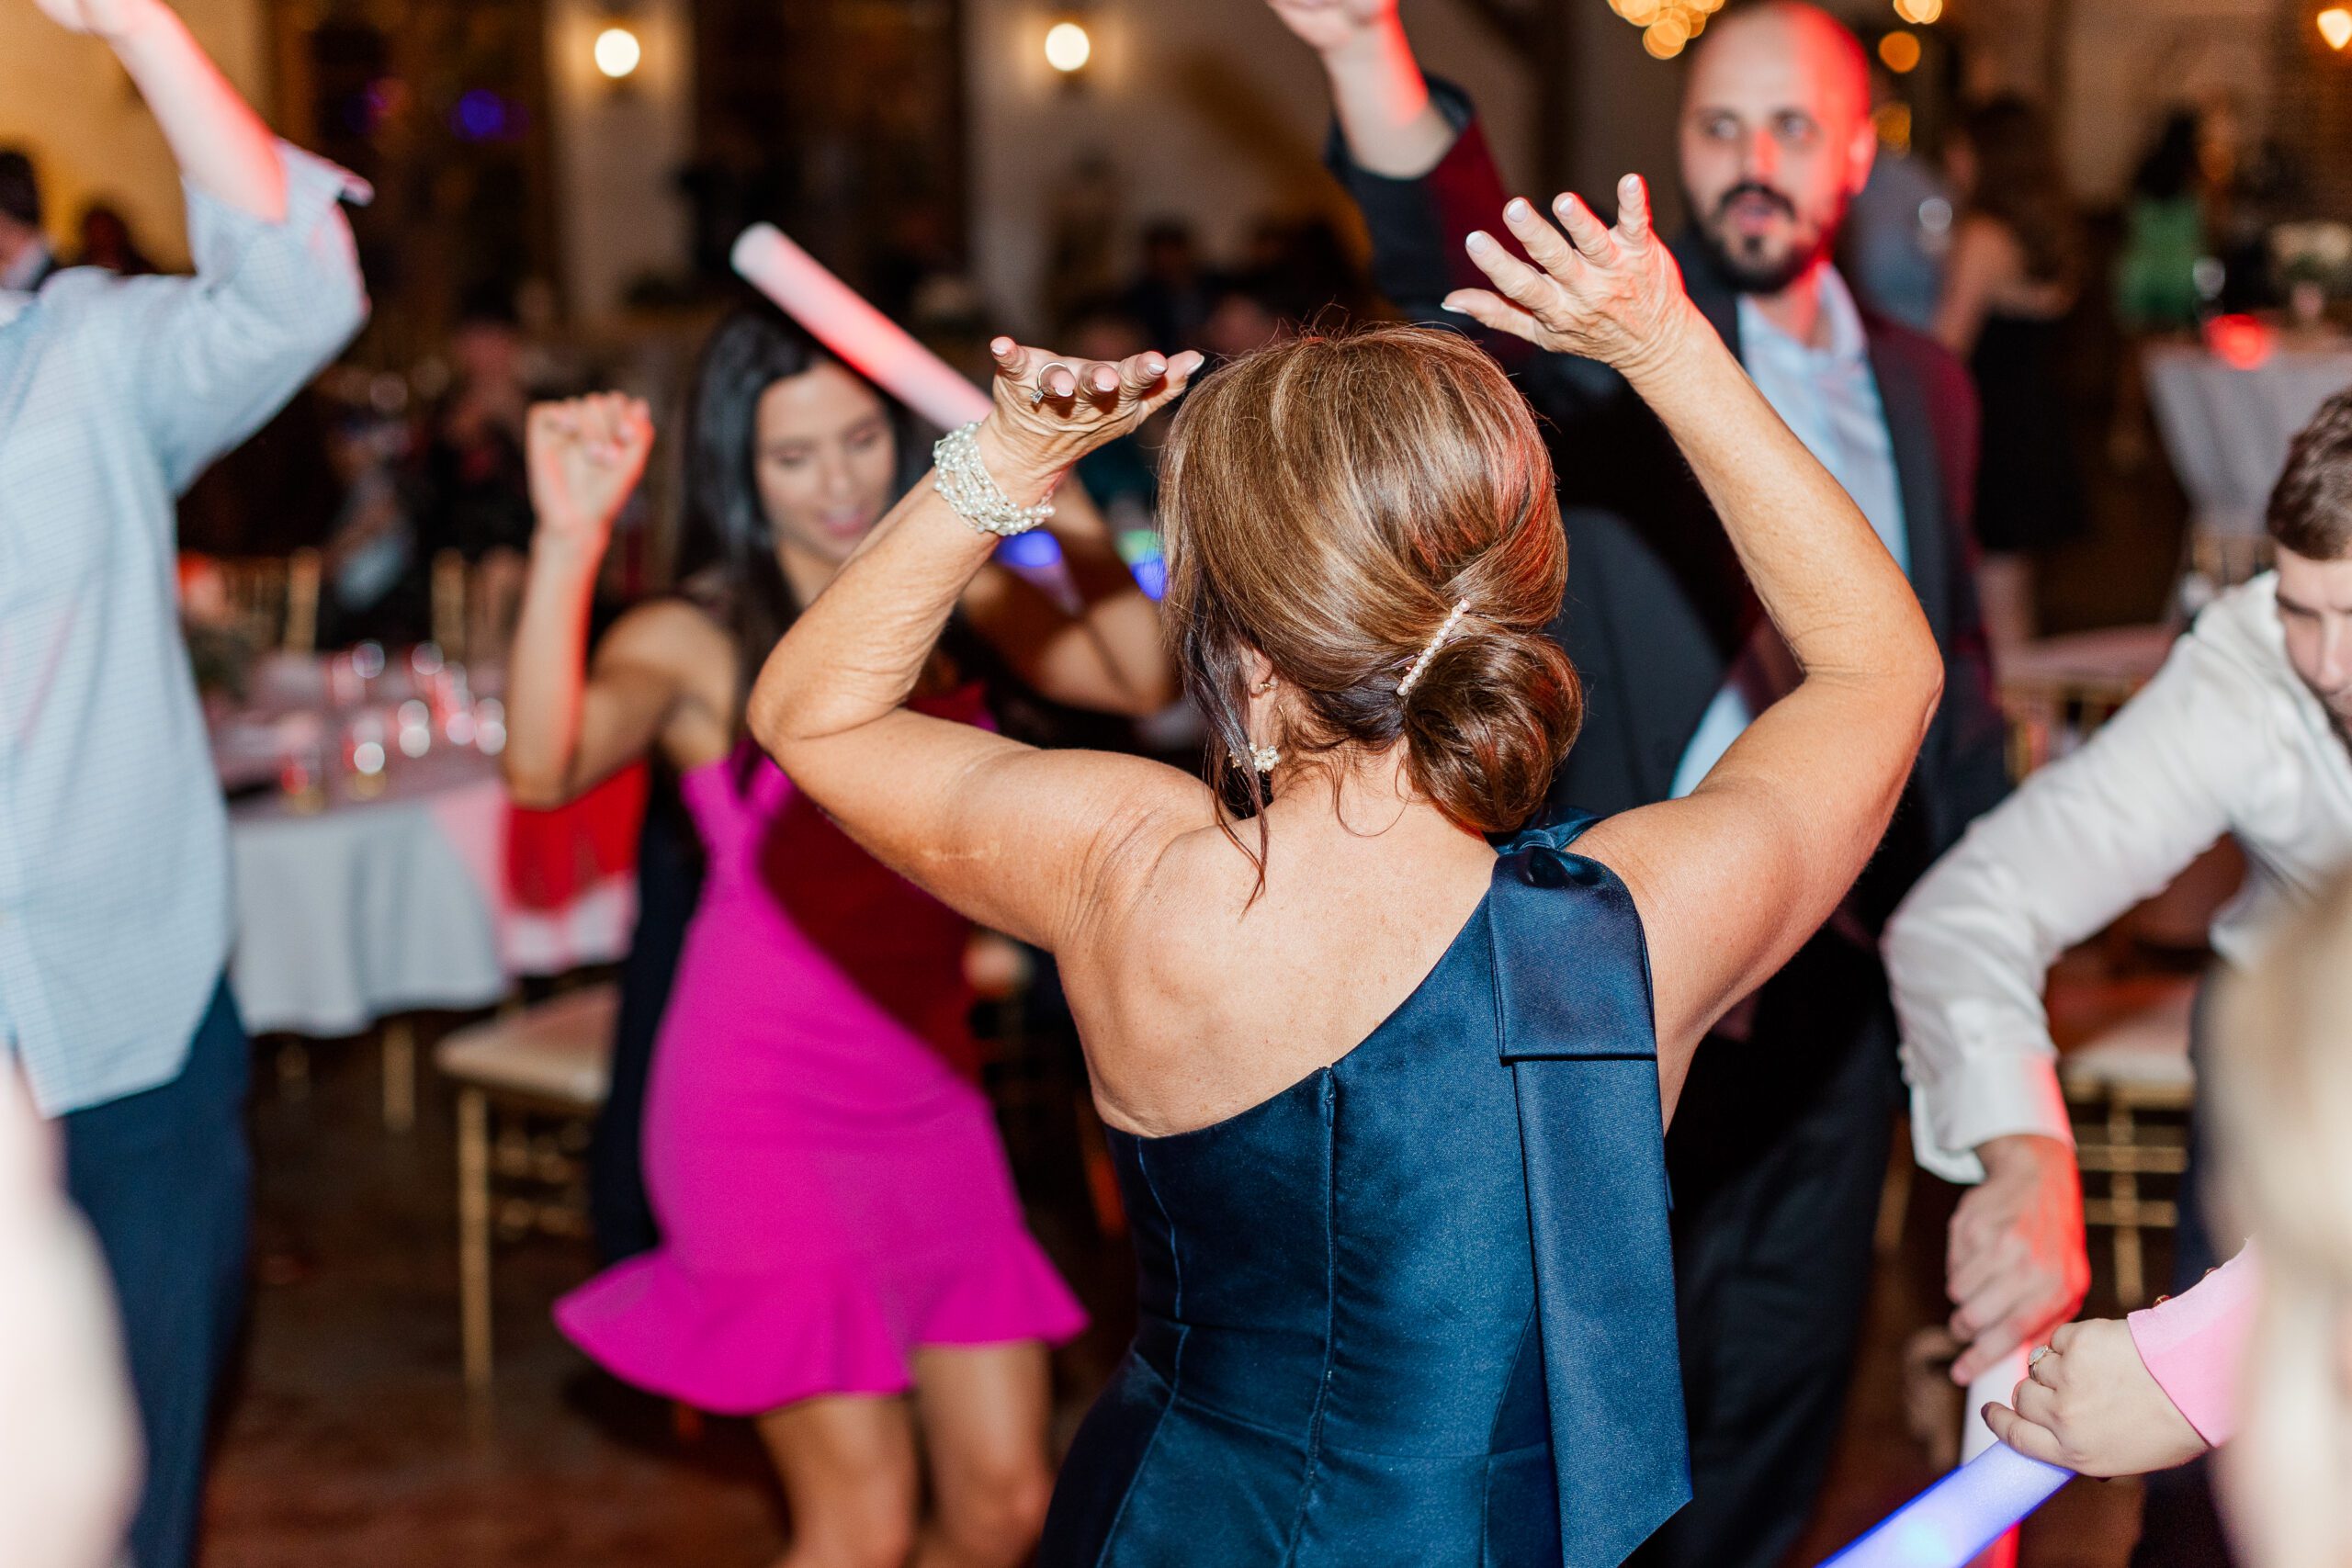 wedding guest dancing at a party wedding reception